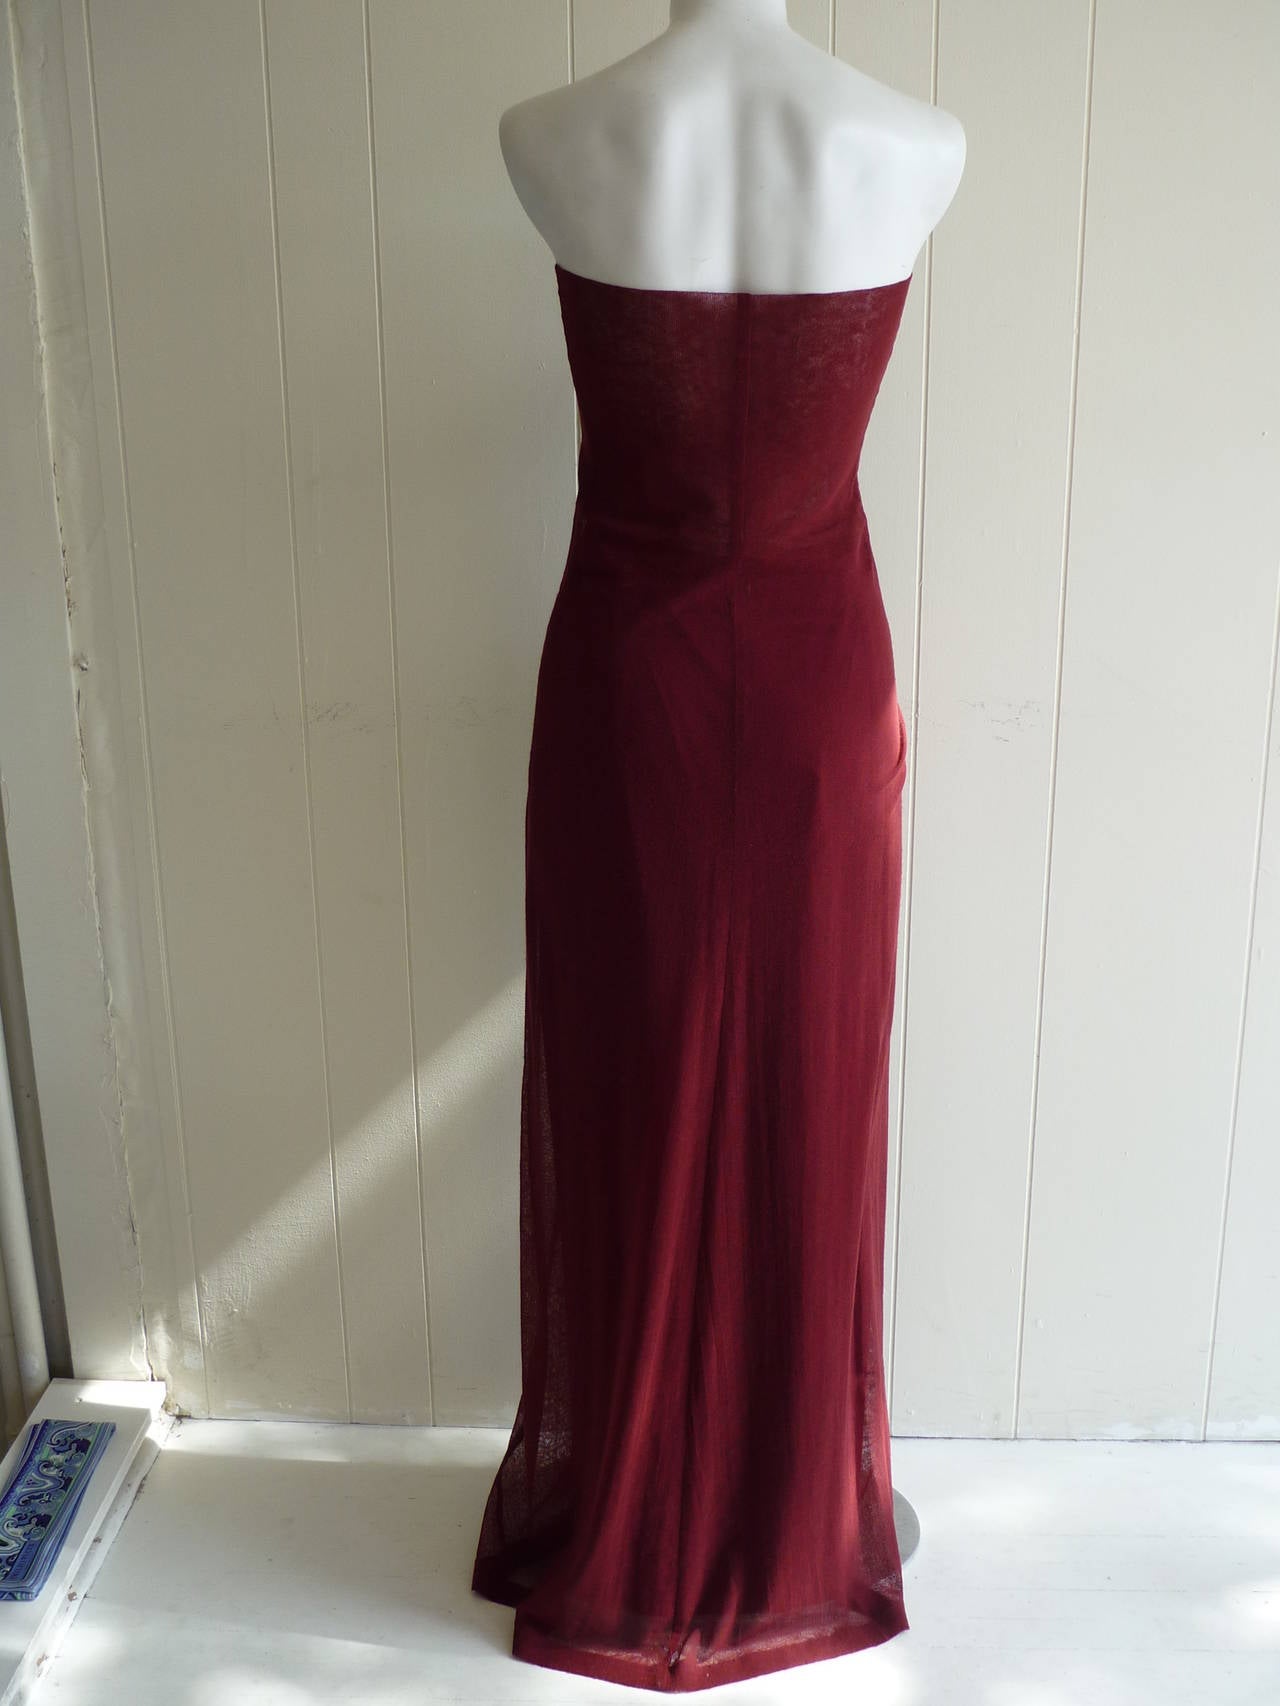 So feminine and elegant with a touch of risque, the sheer mesh maxi dress folds at the top to afford more coverage, but leaves a strip of see through around the top of the stomach. The color of the two-piece outfit is burgundy.